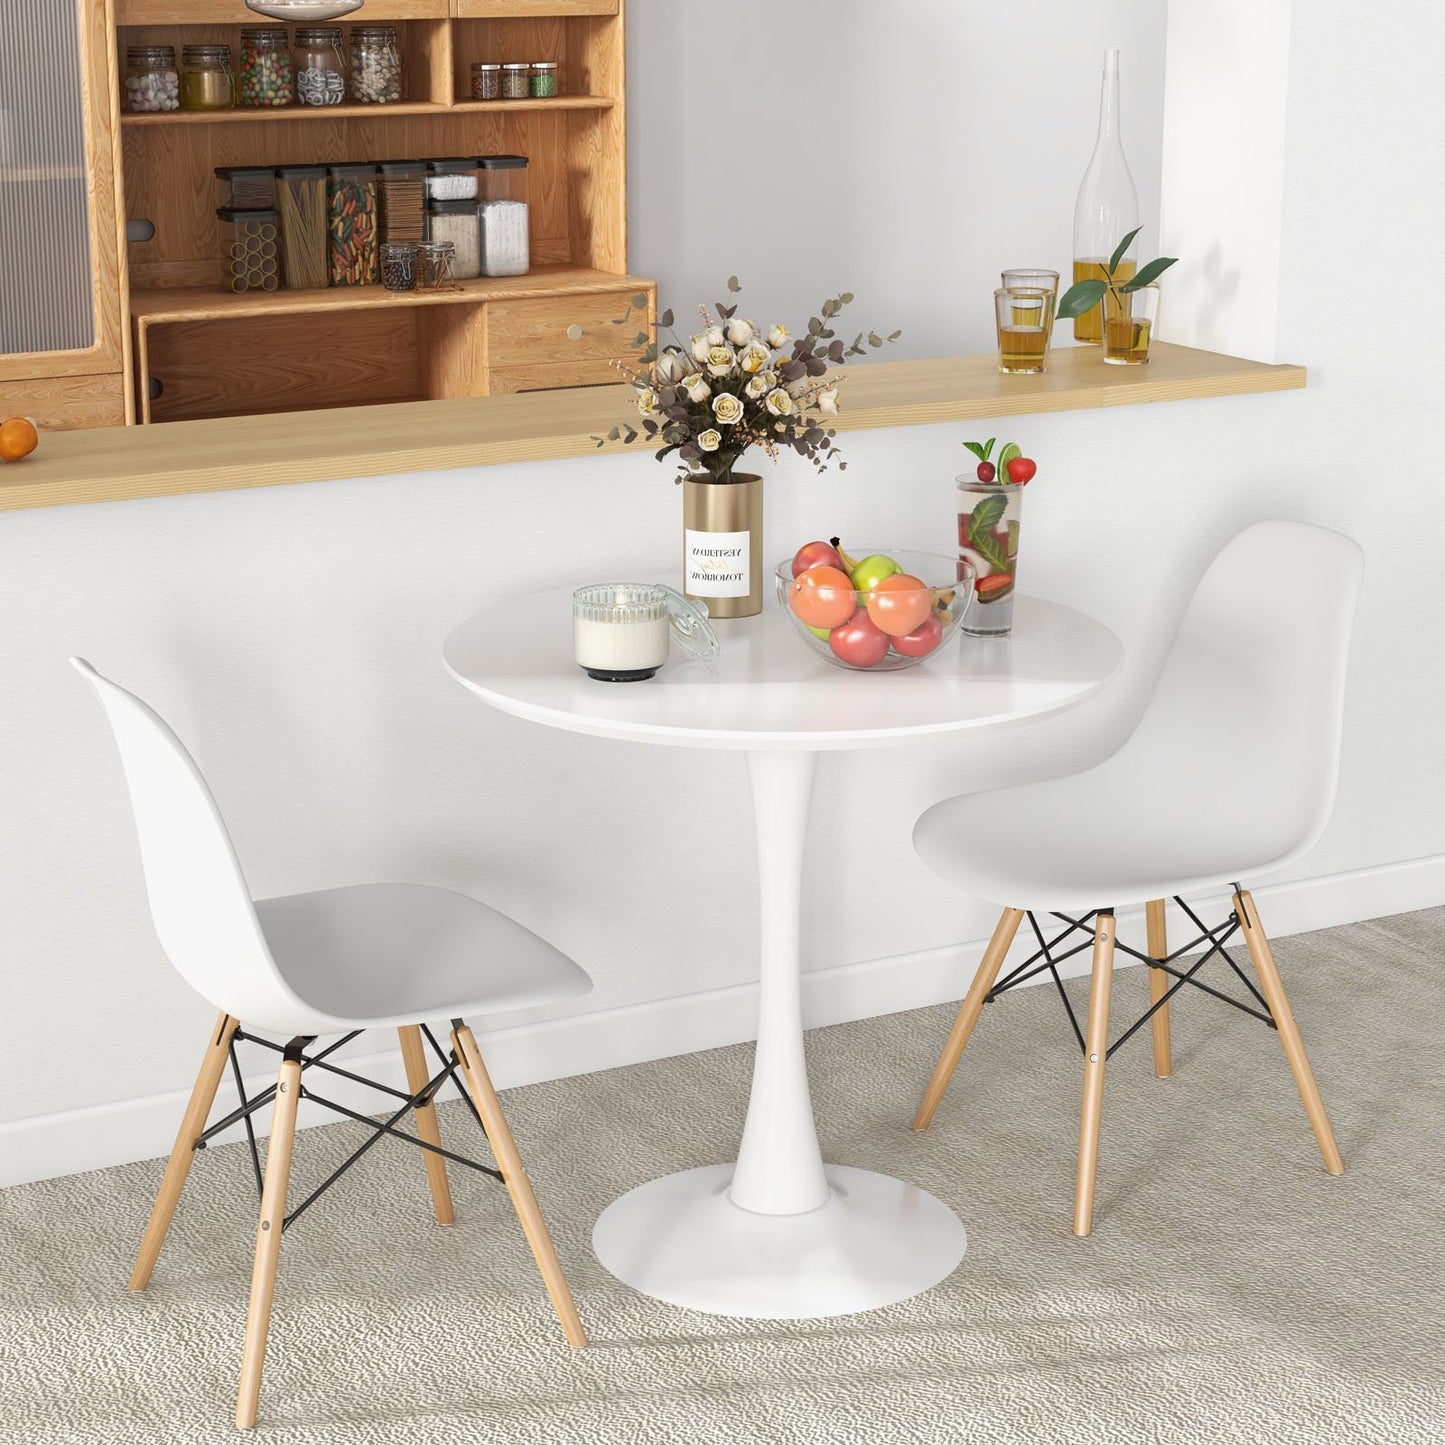 32 Inch Modern Tulip Round Dining Table with MDF Top, White